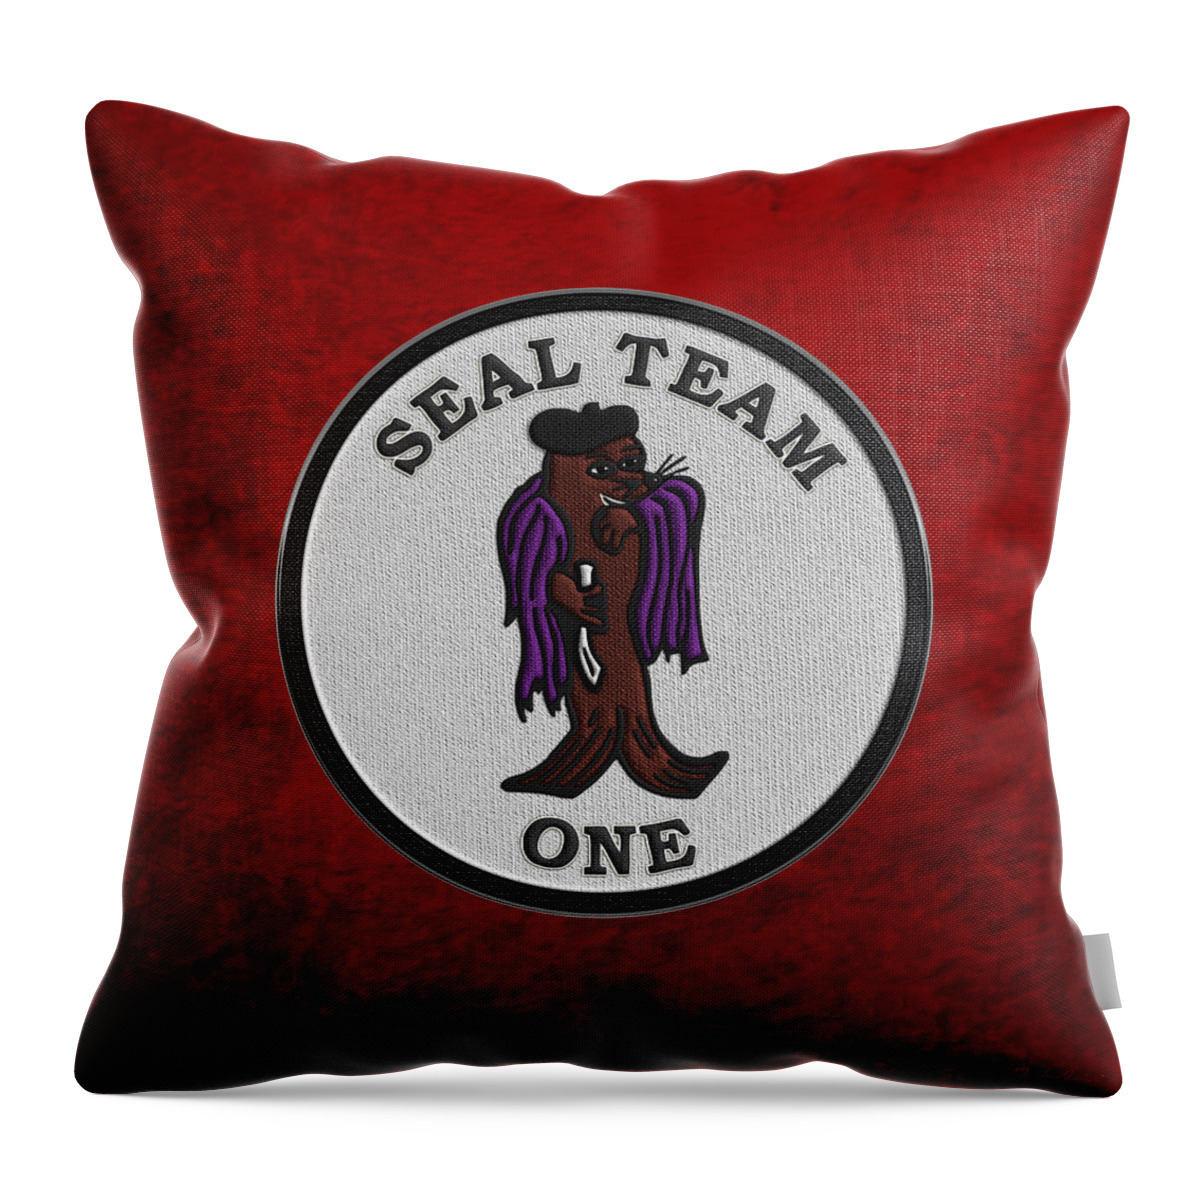 'military Insignia & Heraldry - Nswc' Collection By Serge Averbukh Throw Pillow featuring the digital art U. S. Navy S E A Ls - S E A L Team One - S T 1 Patch over Red Velvet by Serge Averbukh